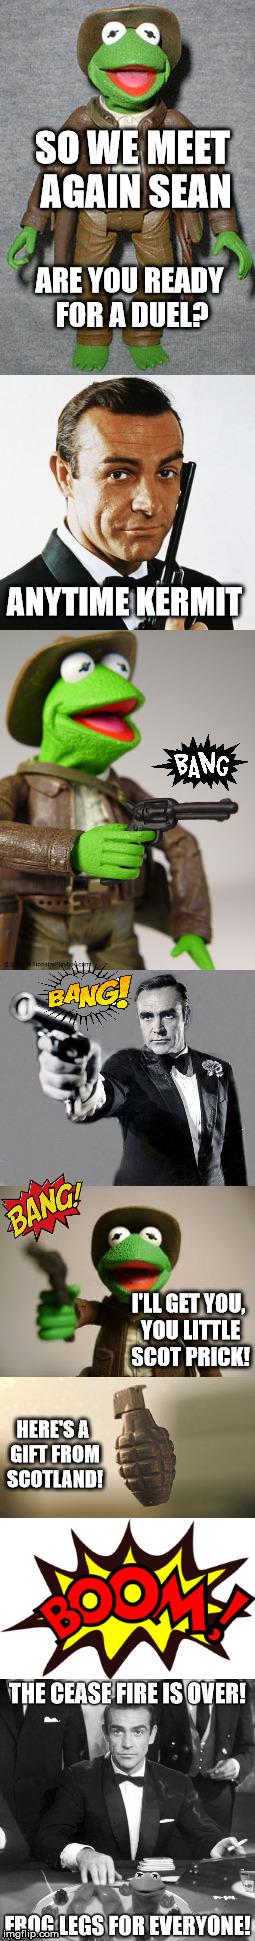 Old rivalry never dies. | SO WE MEET AGAIN SEAN; ARE YOU READY FOR A DUEL? ANYTIME KERMIT; I'LL GET YOU, YOU LITTLE SCOT PRICK! HERE'S A GIFT FROM SCOTLAND! | image tagged in sean connery  kermit | made w/ Imgflip meme maker